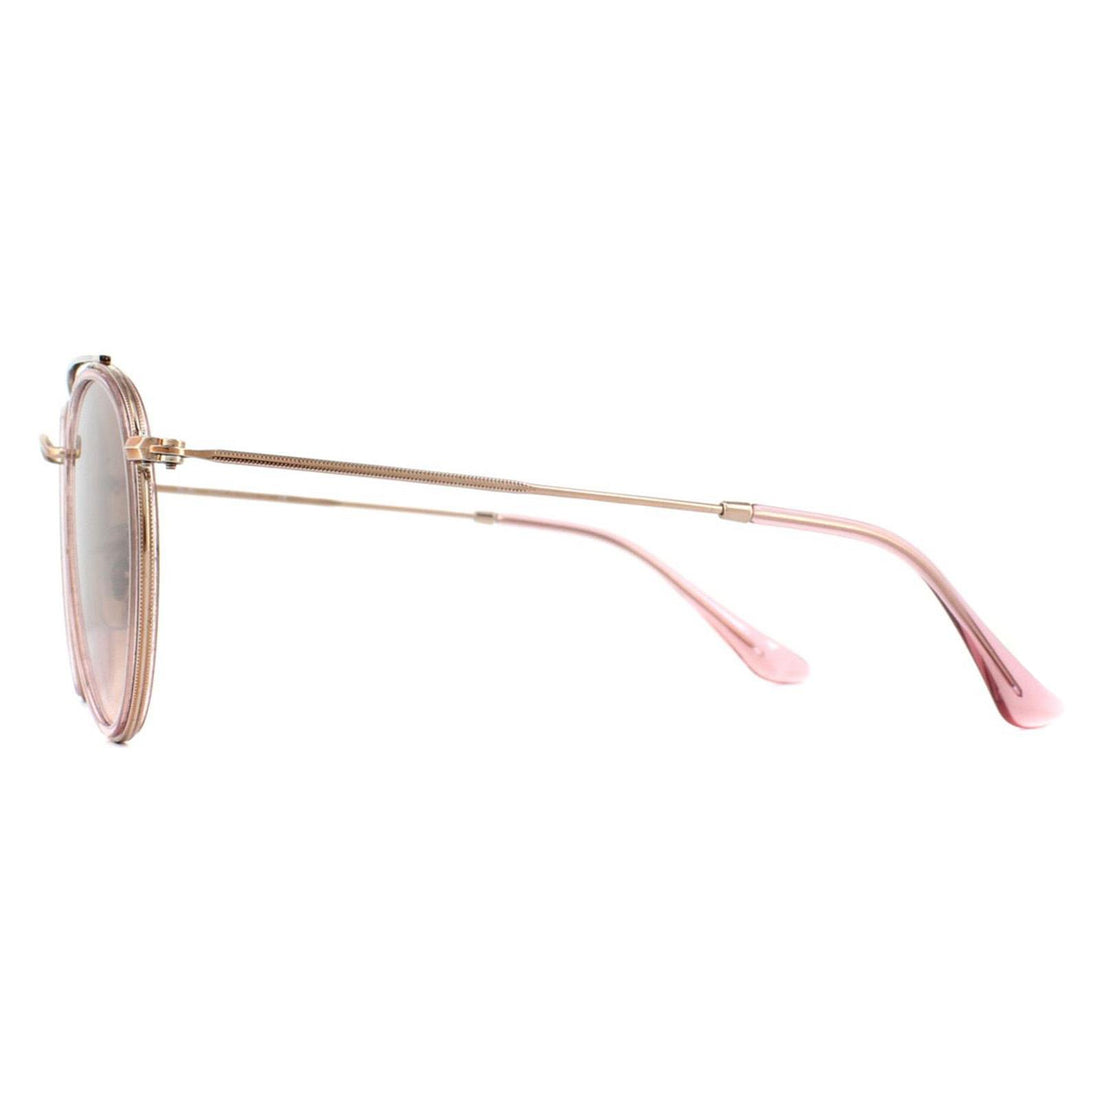 Ray-Ban Sunglasses Round Double Bridge 3647N 9069A5 Pink Pink Gradient Brown